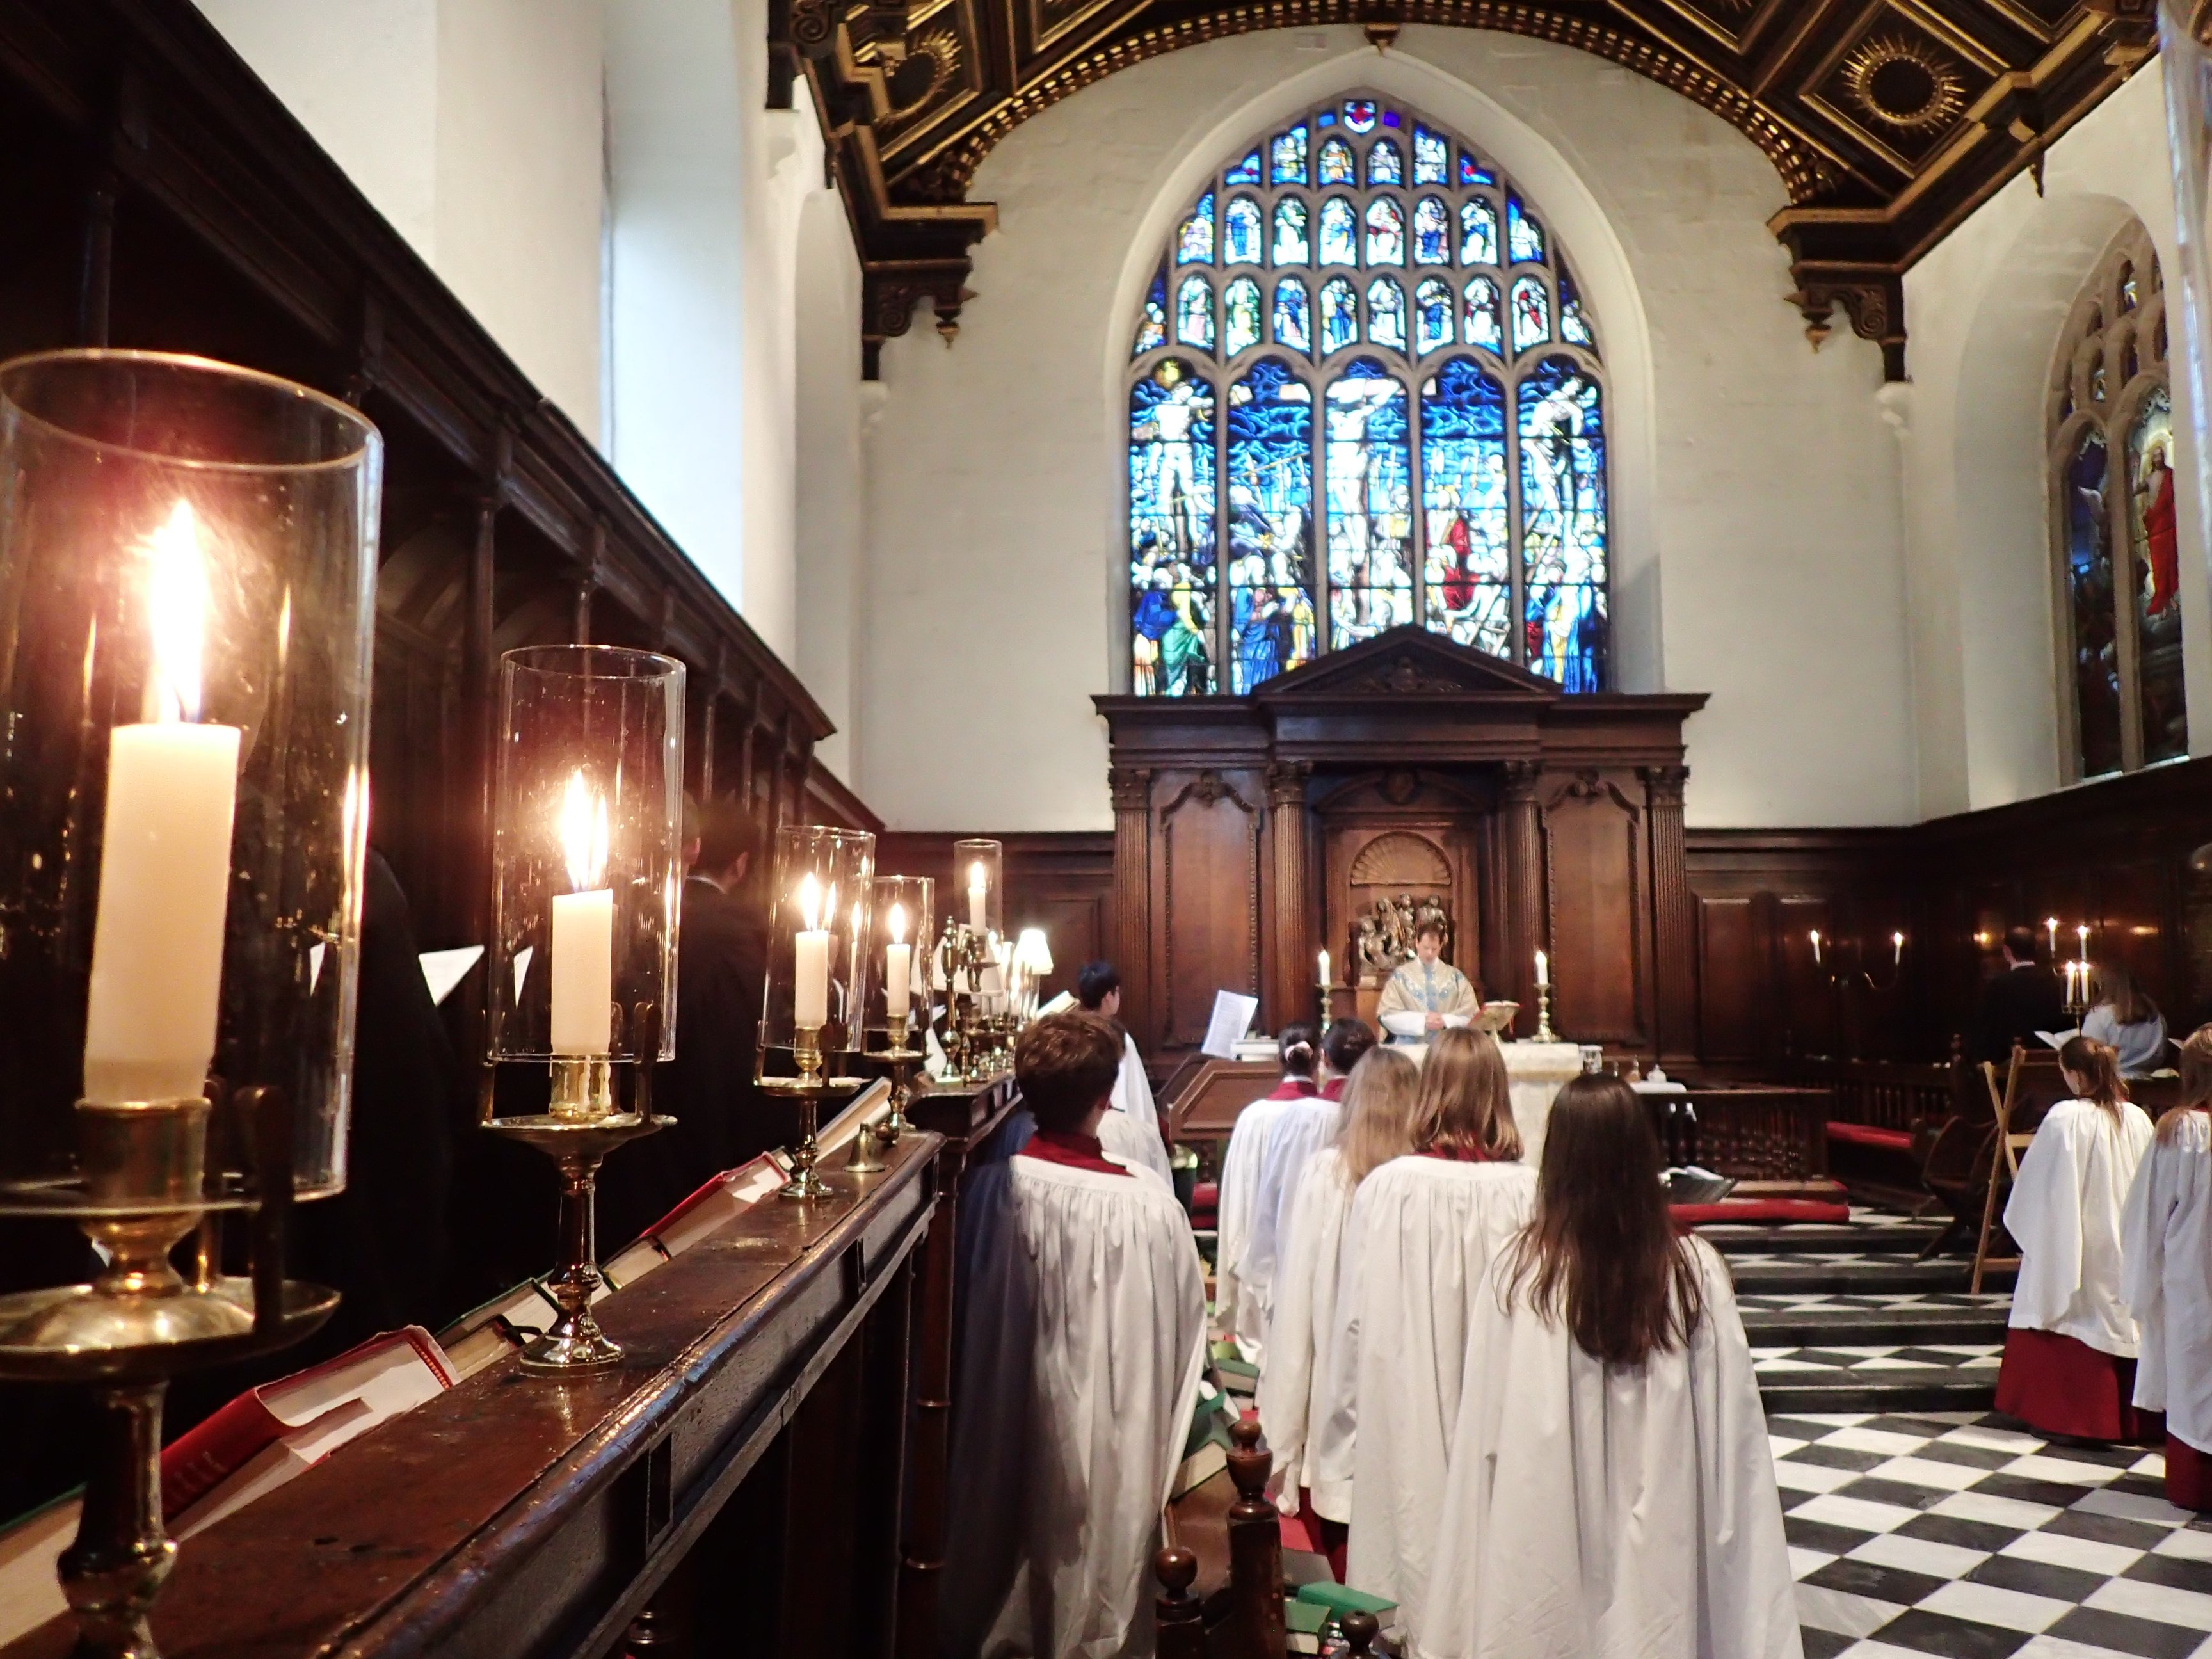 A service in the Chapel